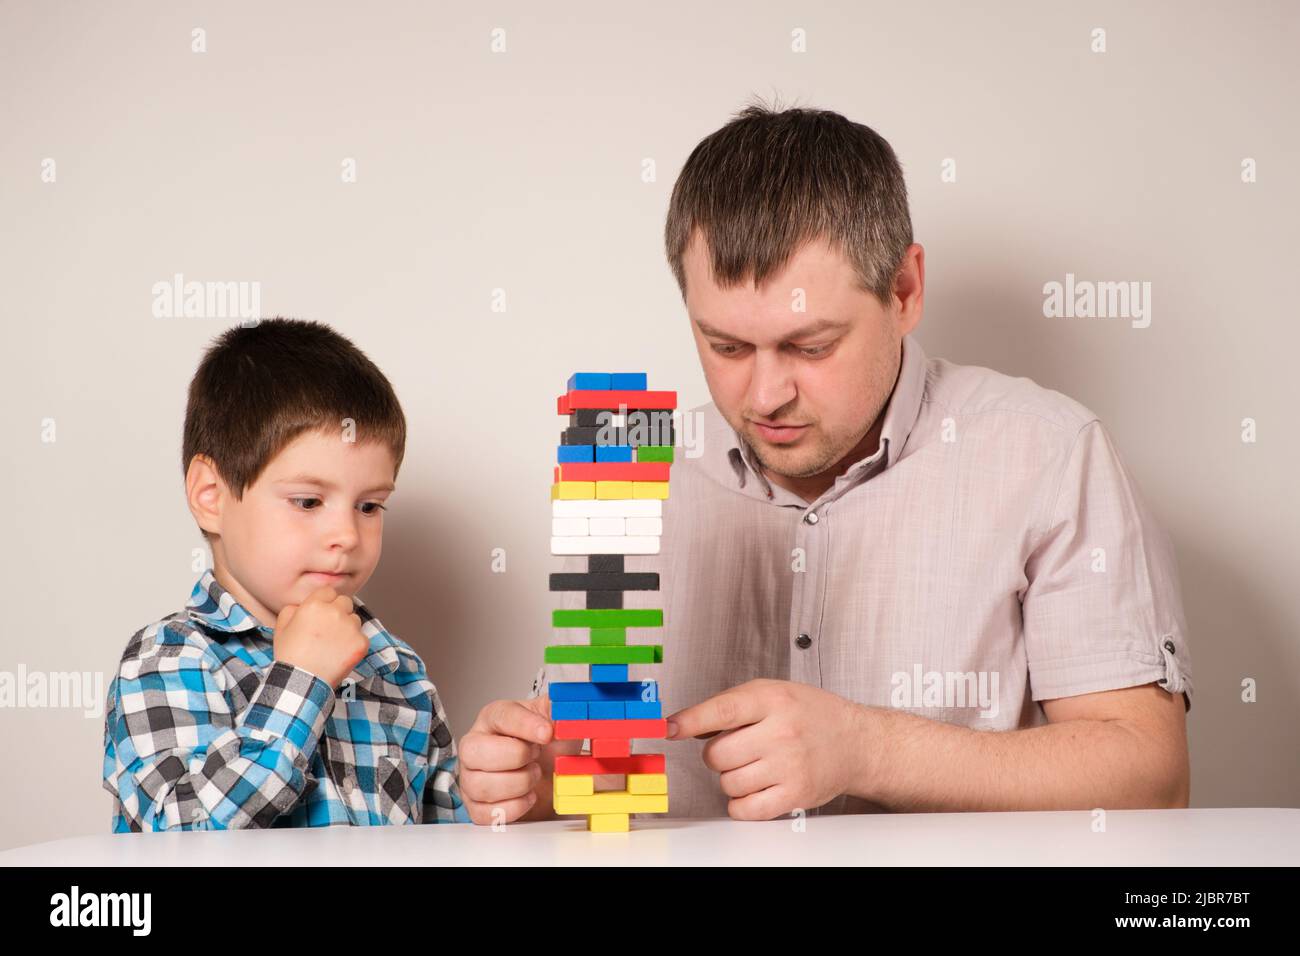 Dad and son play a board game together, pull parts out of the tower and try not to overwhelm the tower Stock Photo